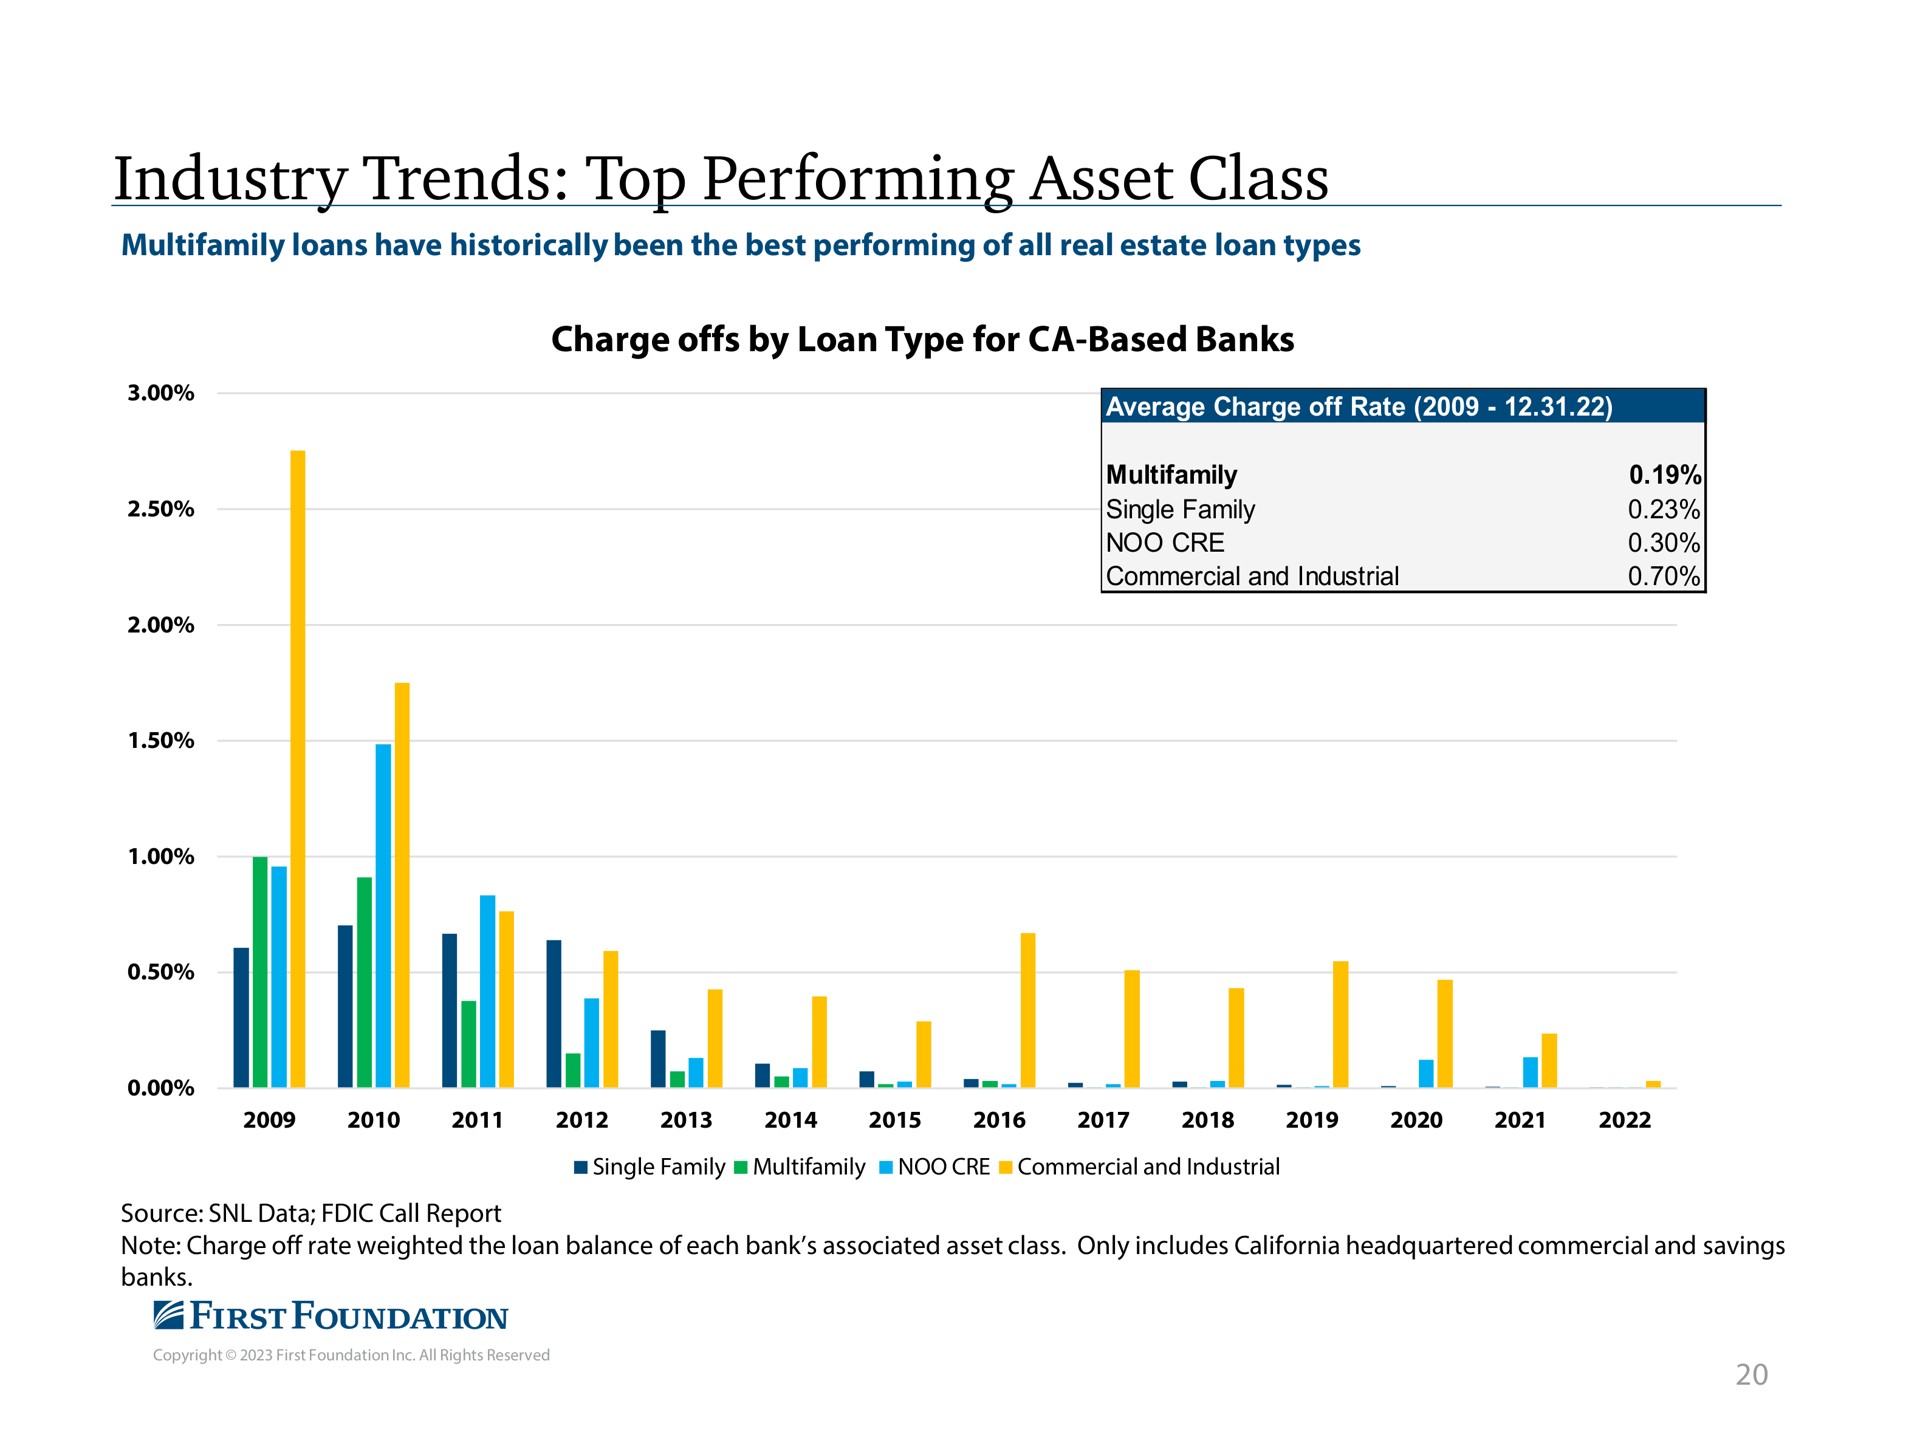 industry trends top performing asset class charge offs by loan type for based banks said average off rate first foundation | First Foundation